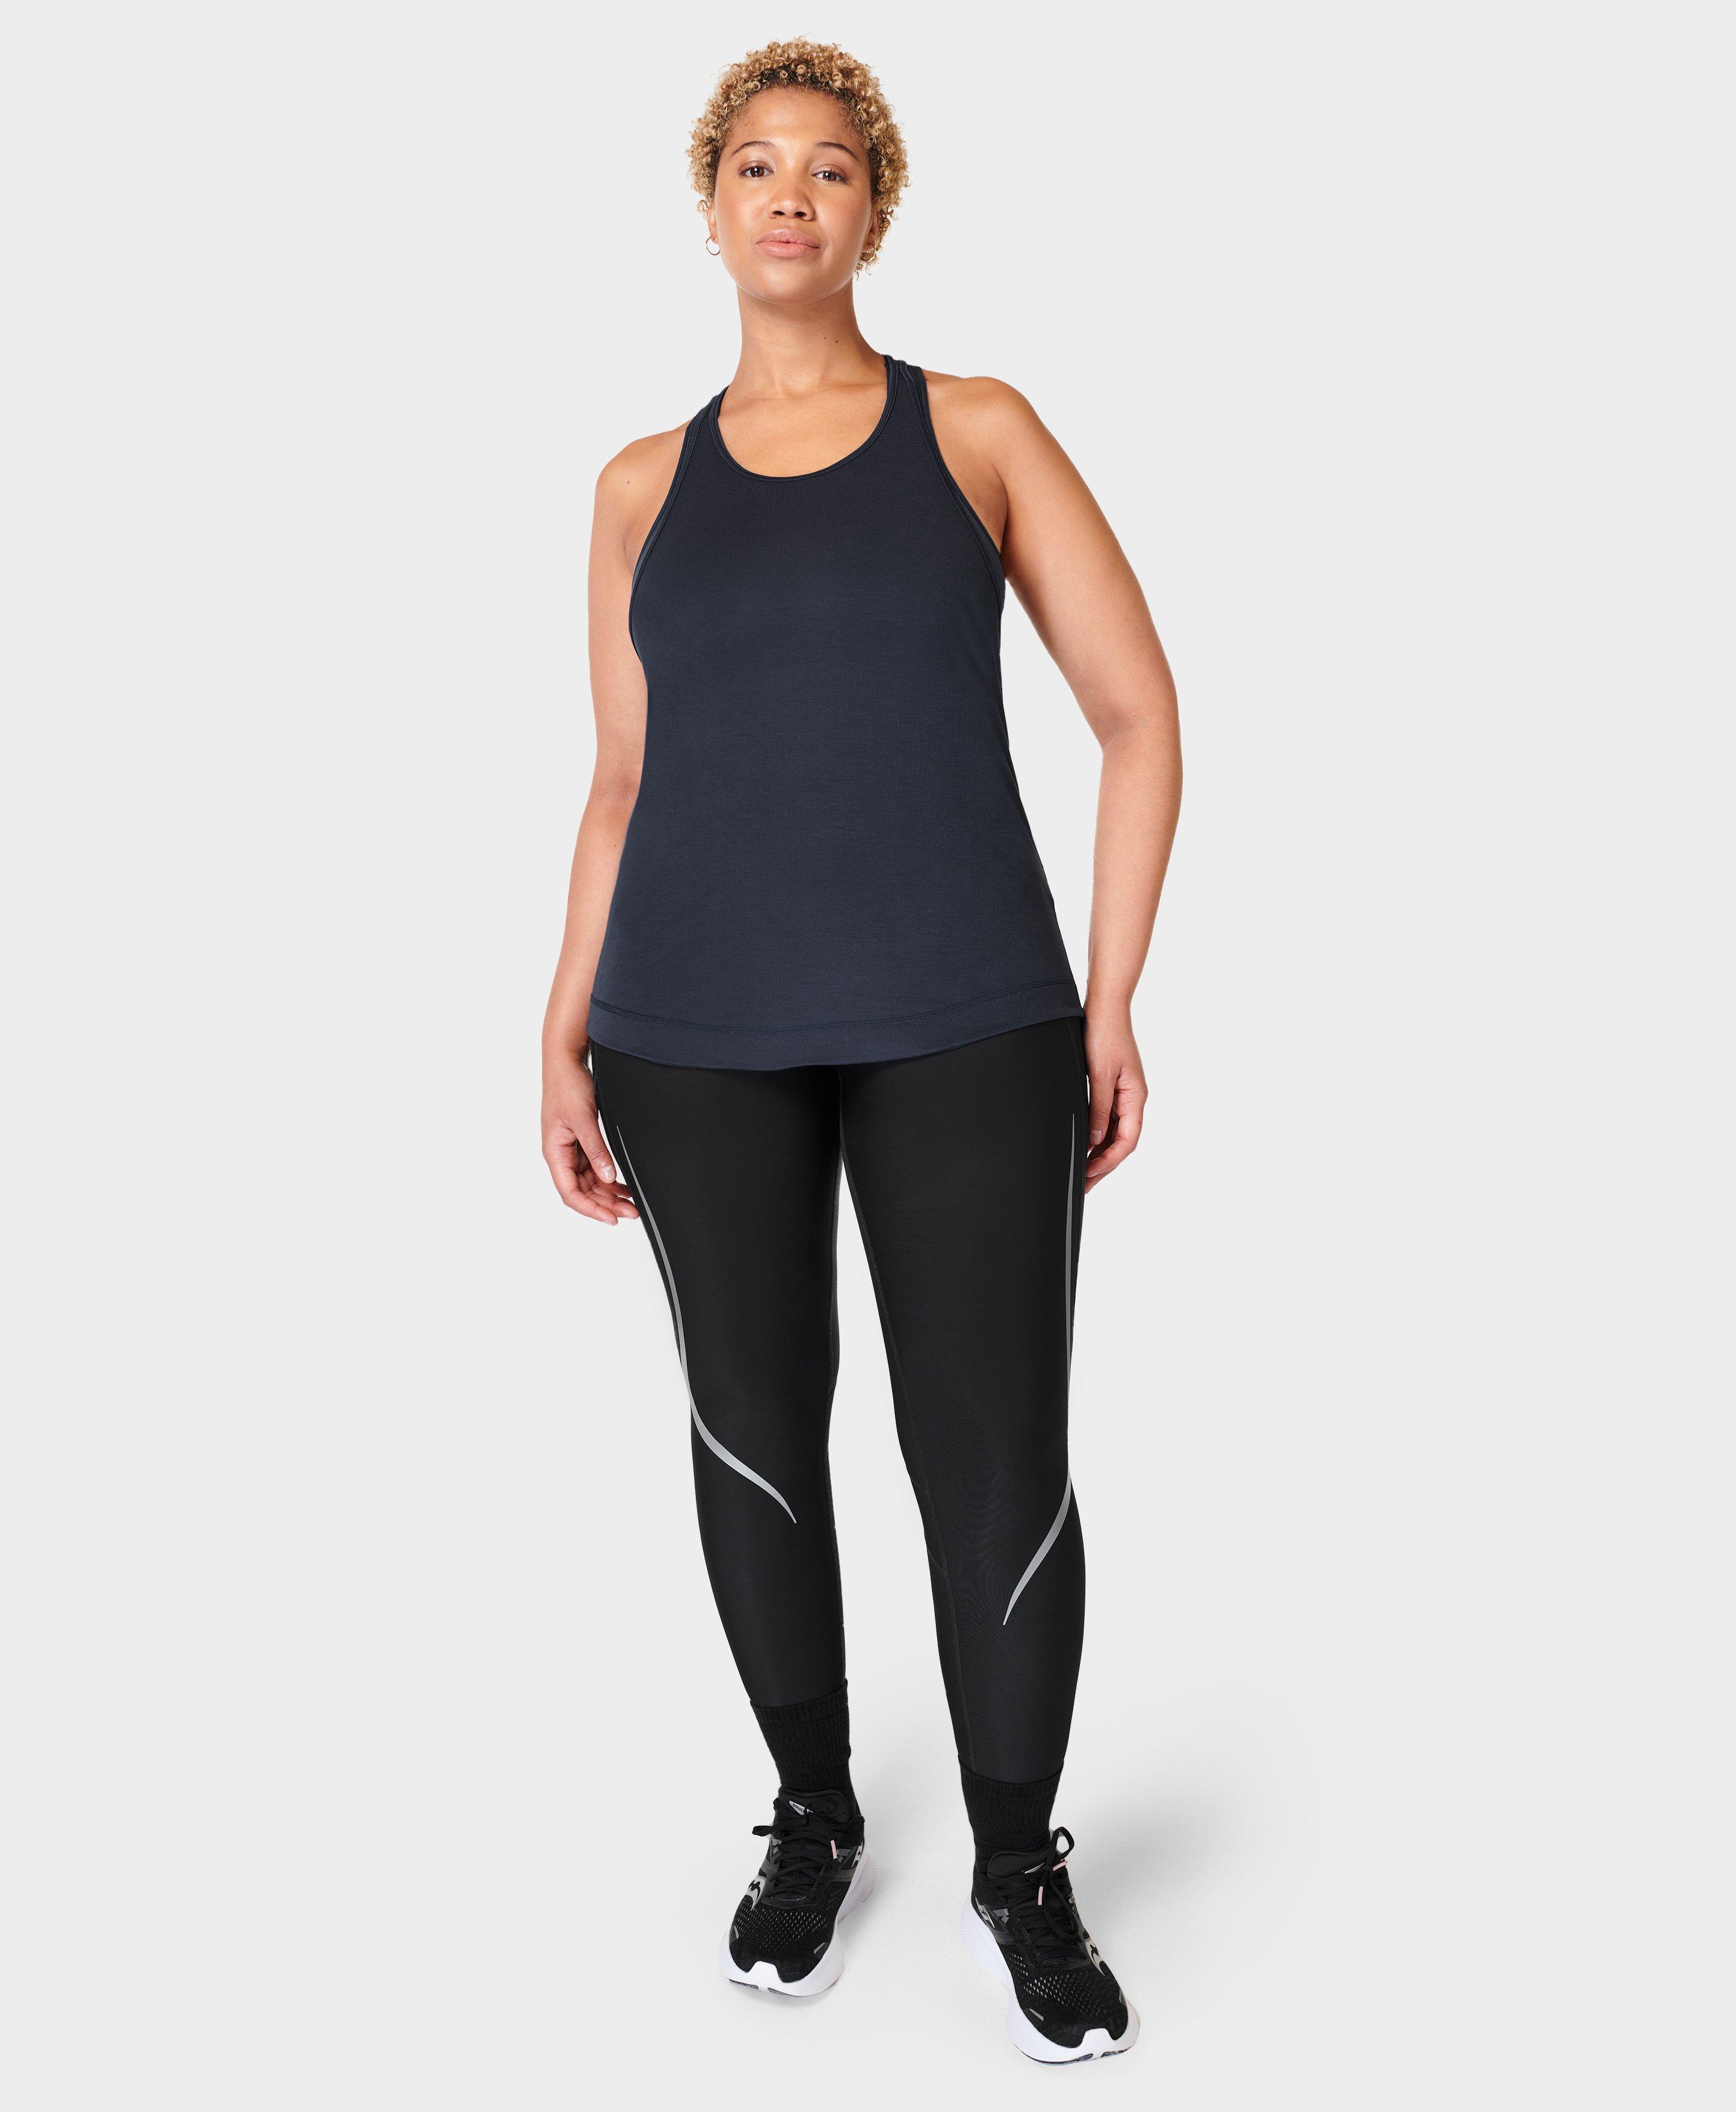 LULULEMON Fast and Free Recycled Breathe Light Mesh Tank Top for